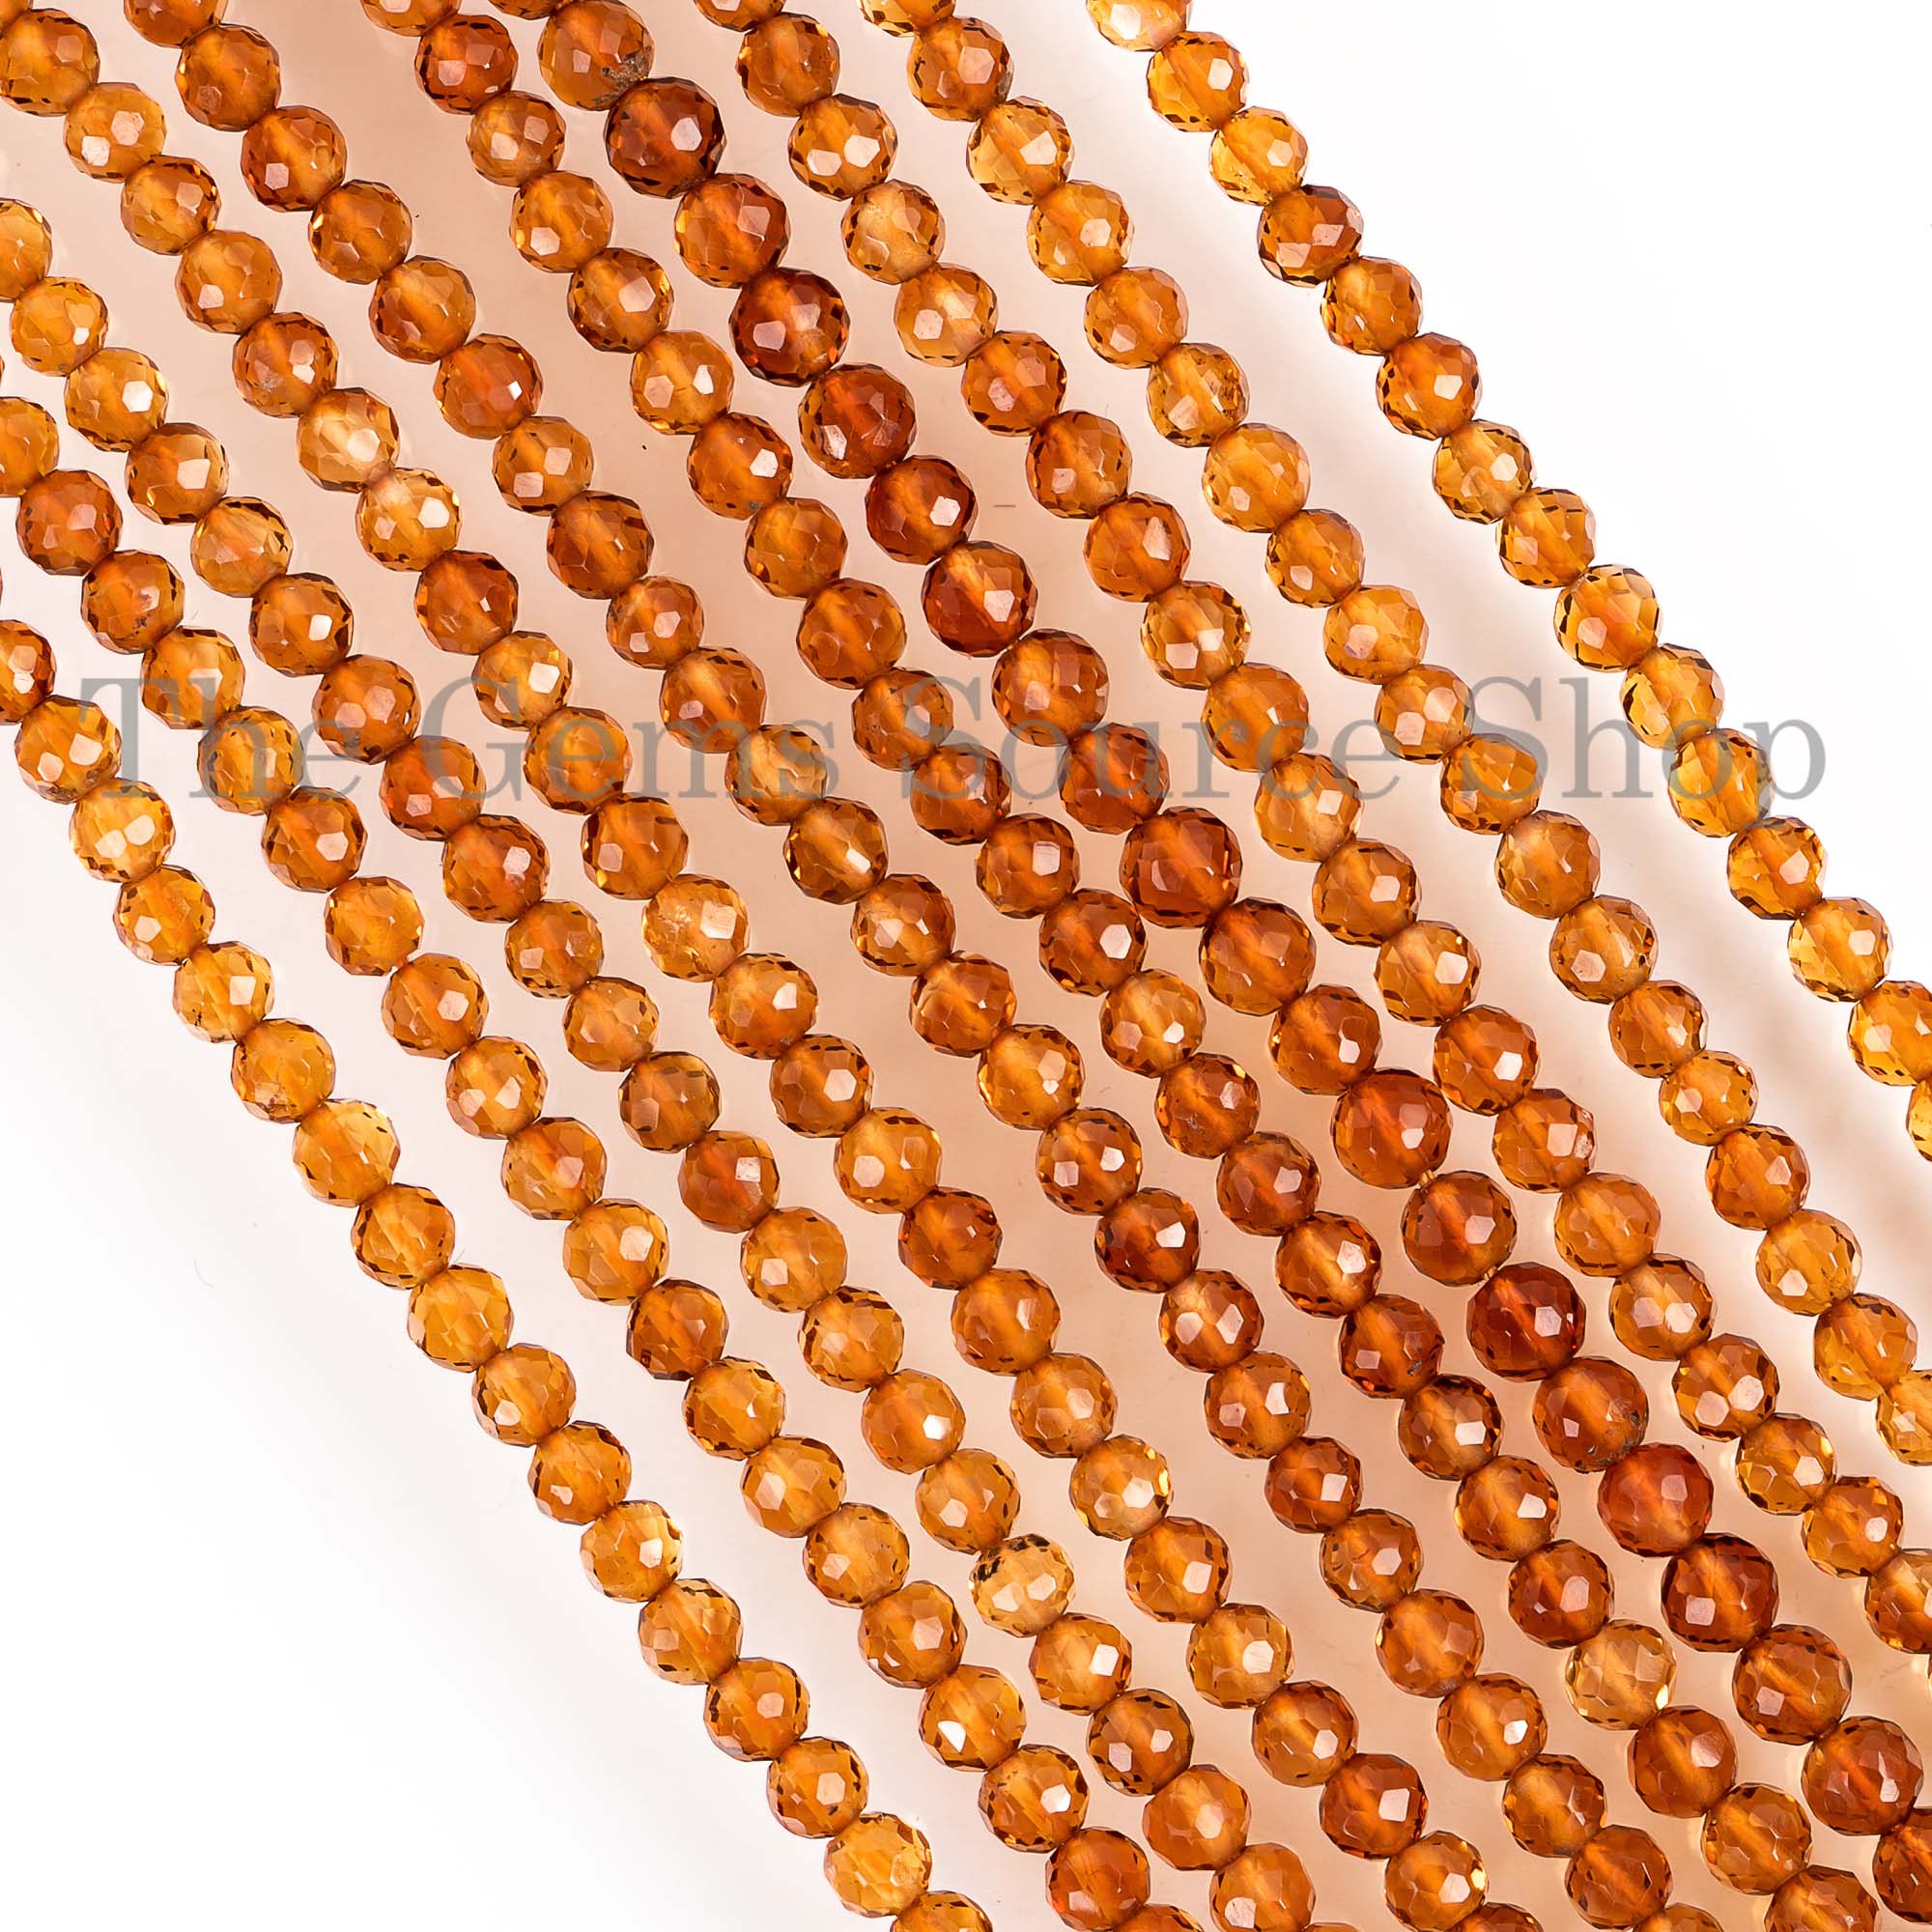 3-3.5mm Madeira Citrine Beads, Citrine Faceted Beads, Citrine Rondelle Beads, Citrine Rondelle, Gemstone Beads